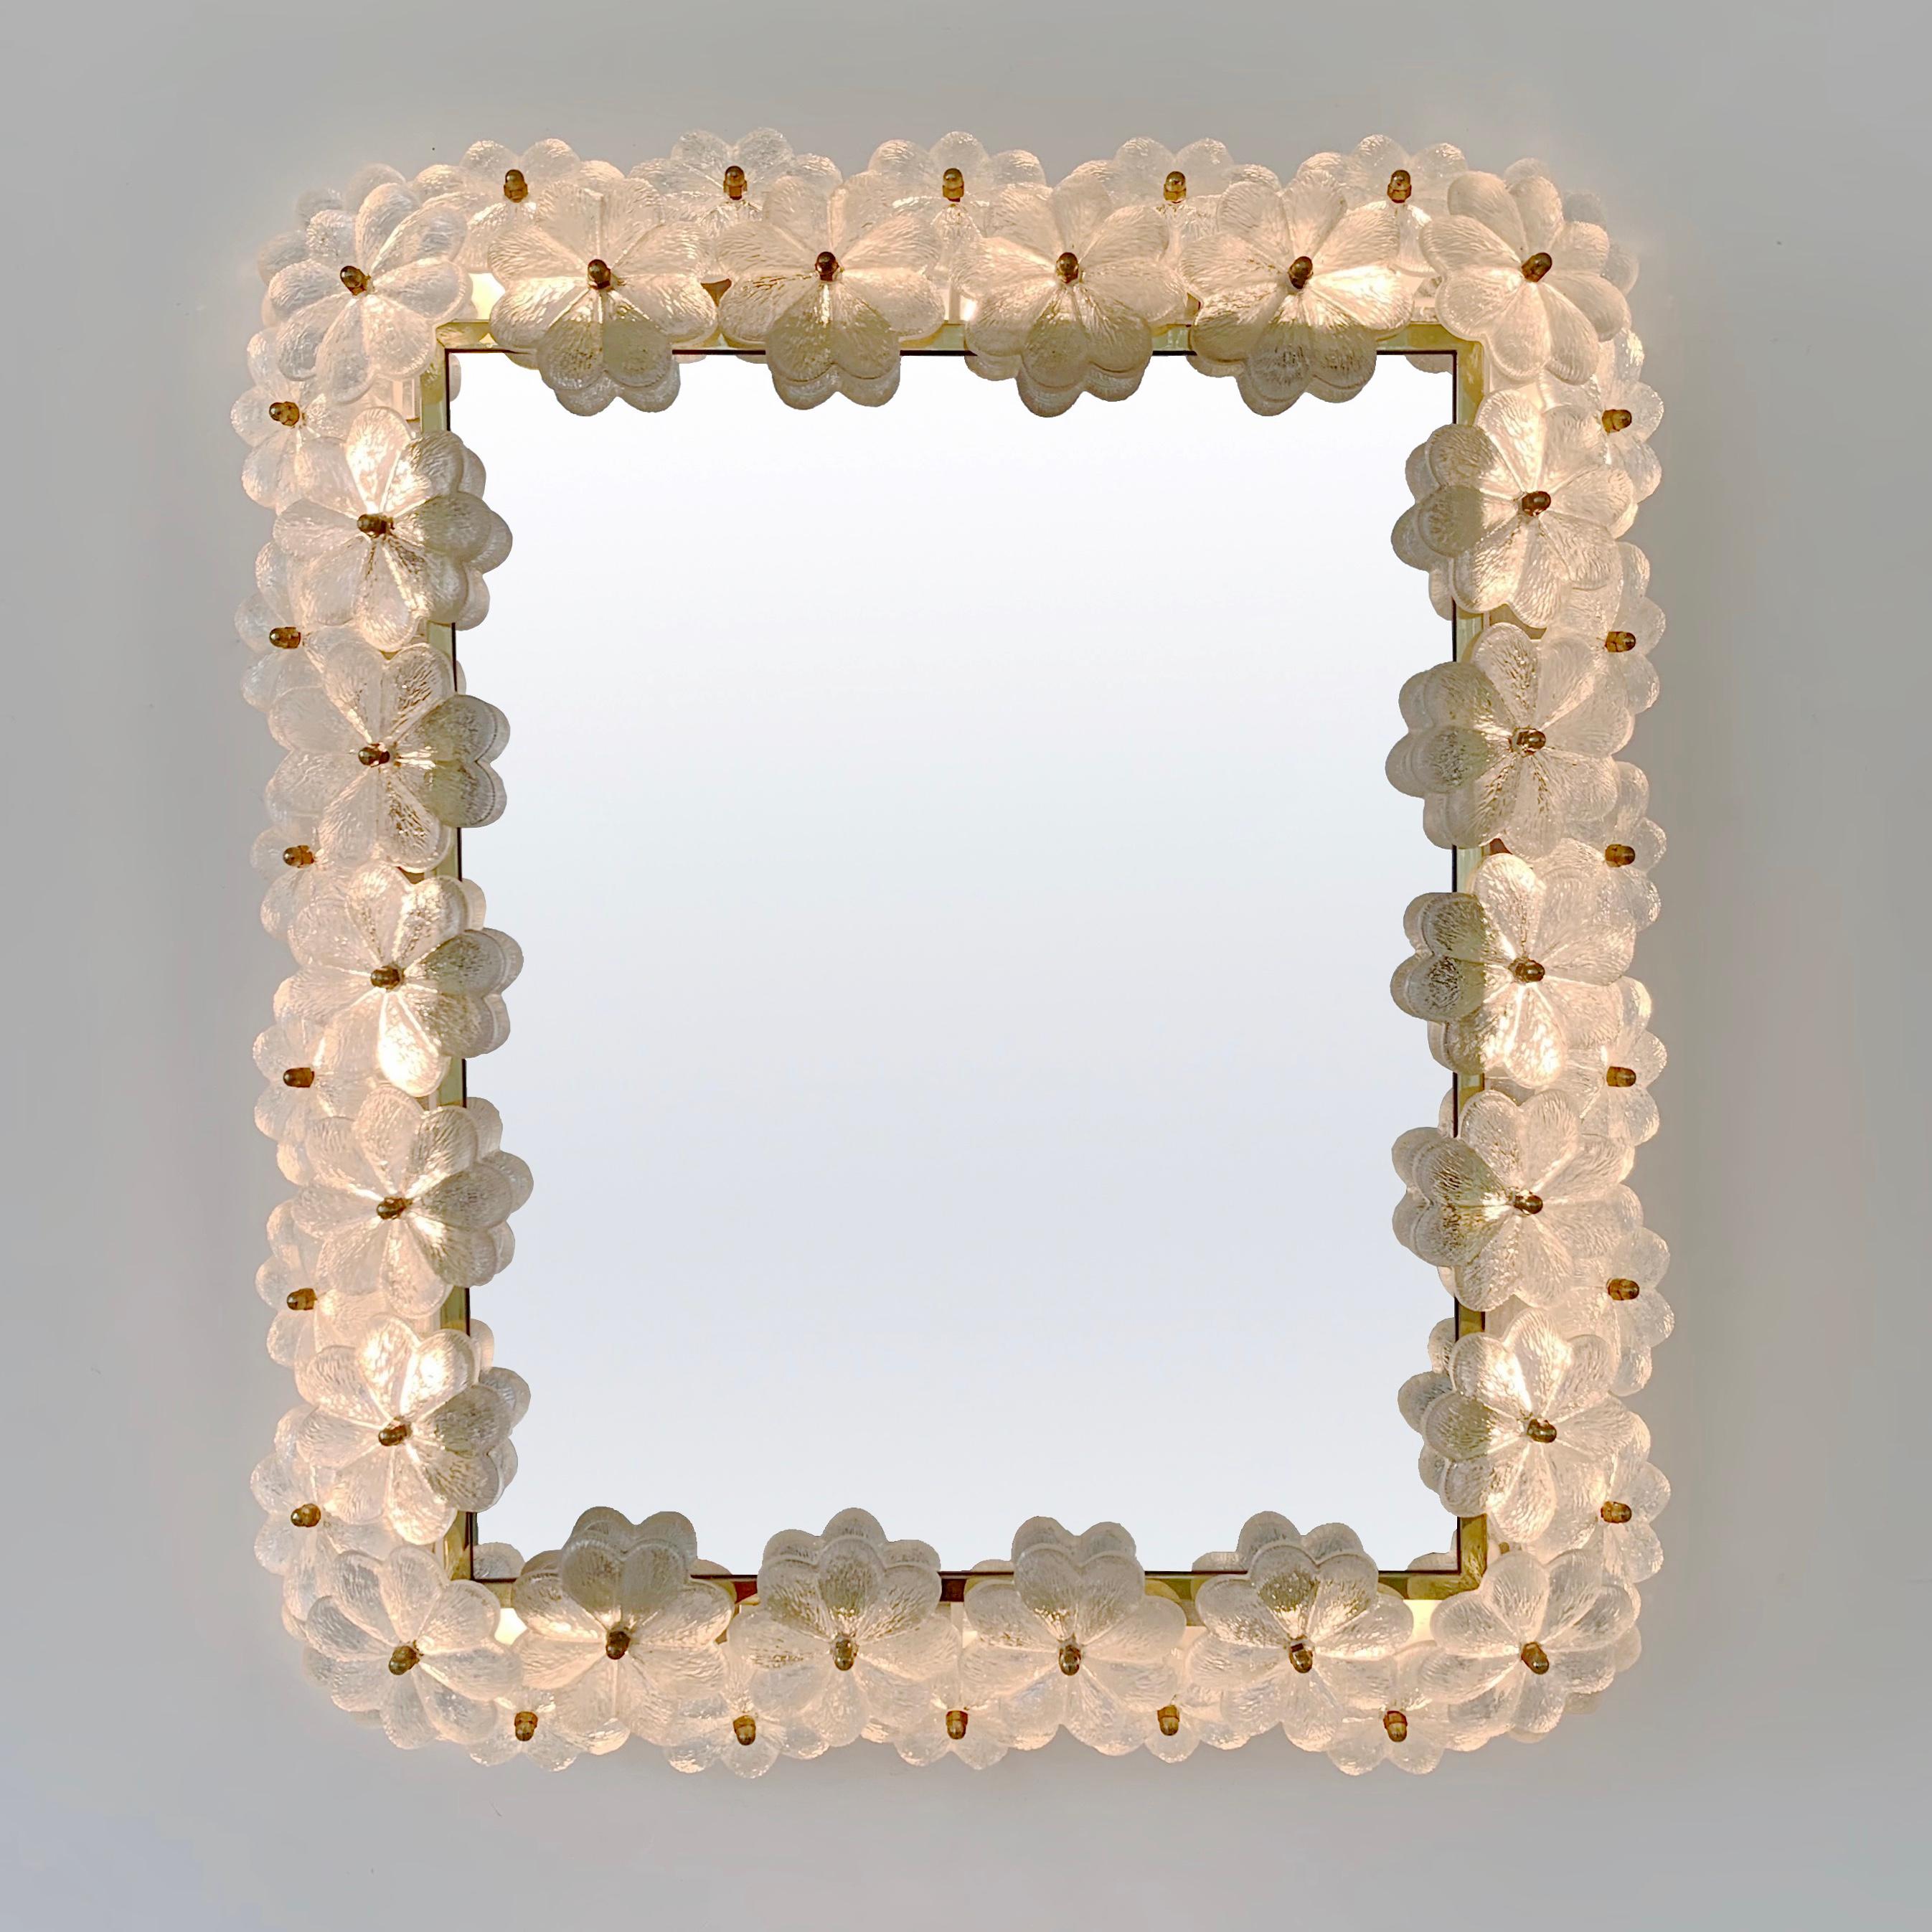 Very nice Illuminated mirror circa 1960, Italy.
2 rows of Murano glass and brass flowers on metal frame.
8 E14 bulbs of 25 W.
Beautiful soft halo when the light is on.
Dimensions: 68 cm H, 55 cm W, 15 cm D.
Good original condition.
All purchases are